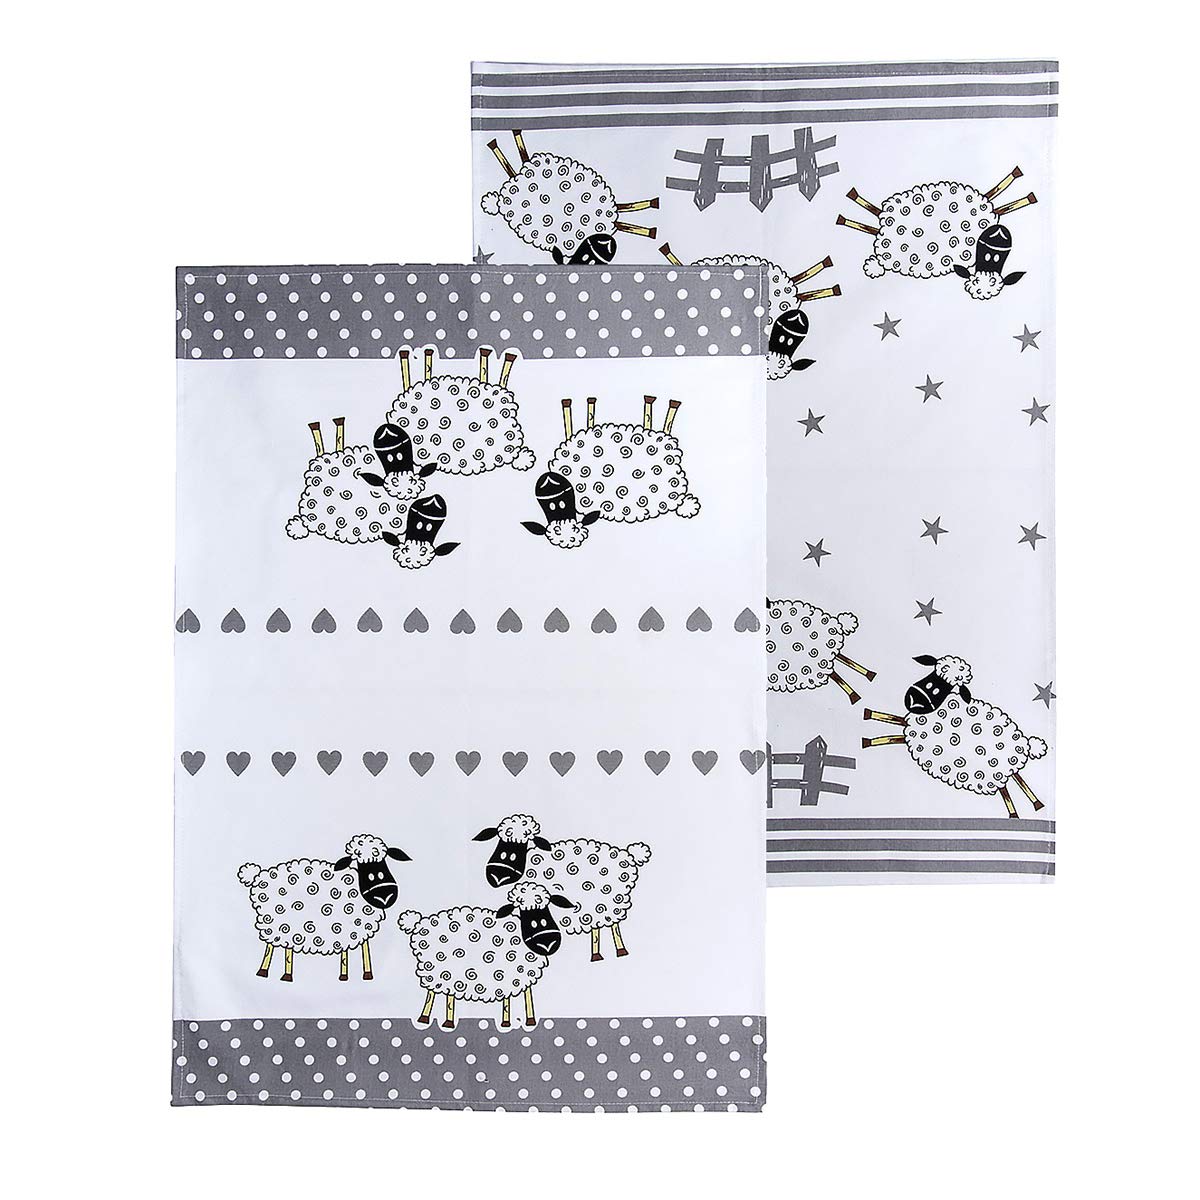 SPOTTED DOG GIFT COMPANY - Tea Towels, 100% Cotton, 50cm x 70cm, Pack of 2 Home Kitchen Towel with Hanging Loop, Sheep Themed Gift